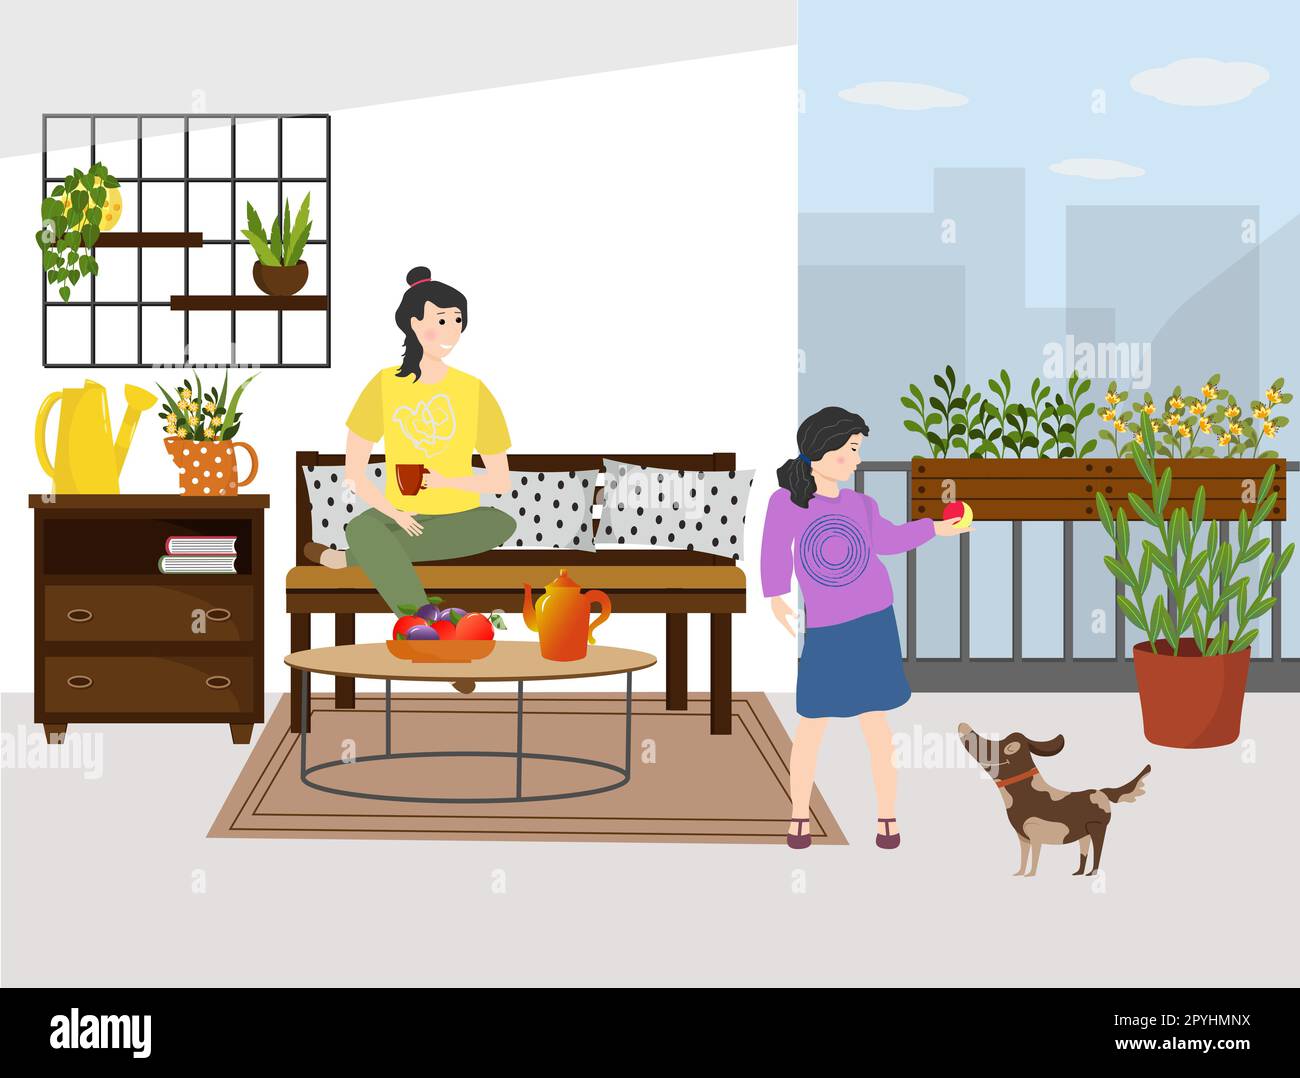 Terrace for relaxation. Mom is sitting on the sofa. The girl plays with the dog. Home garden interior - flowers and plants. Vector illustration.  Stock Vector